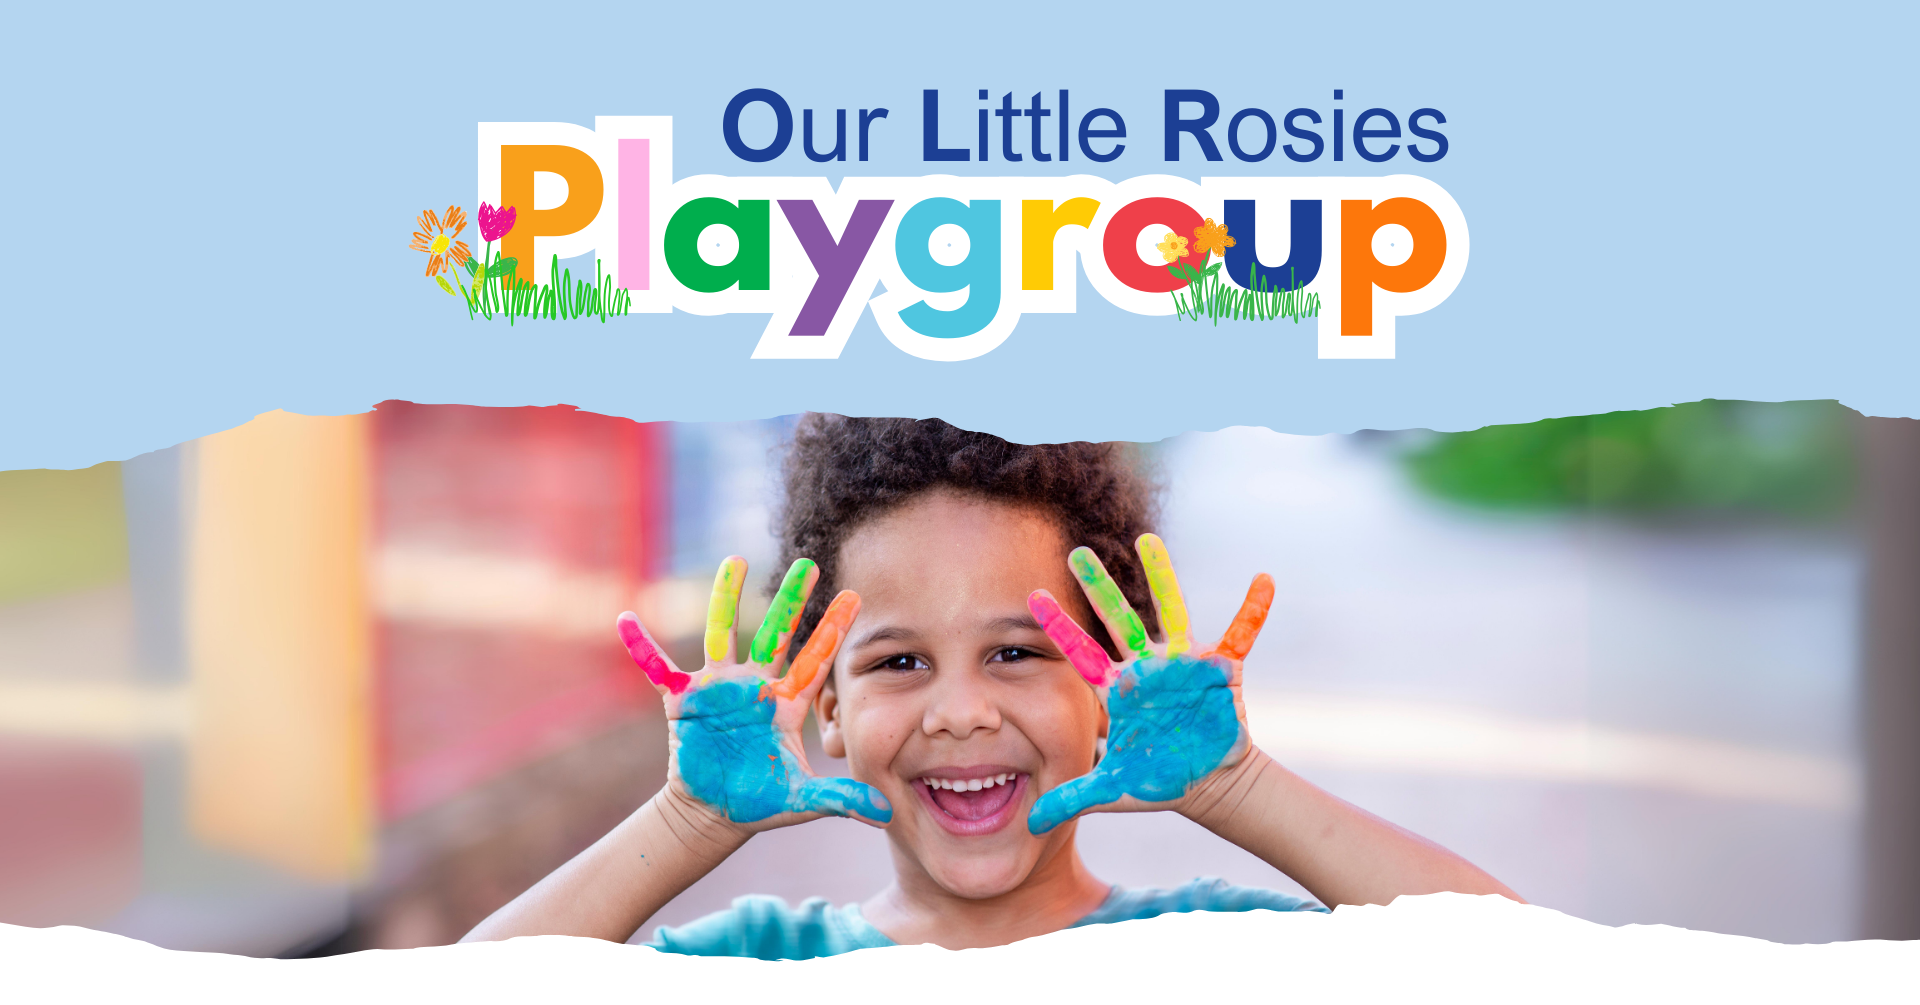 OLR Kenmore - Our Little Rosies Playgroup Facebook Event Cover Image - 1920 x 1005px.png